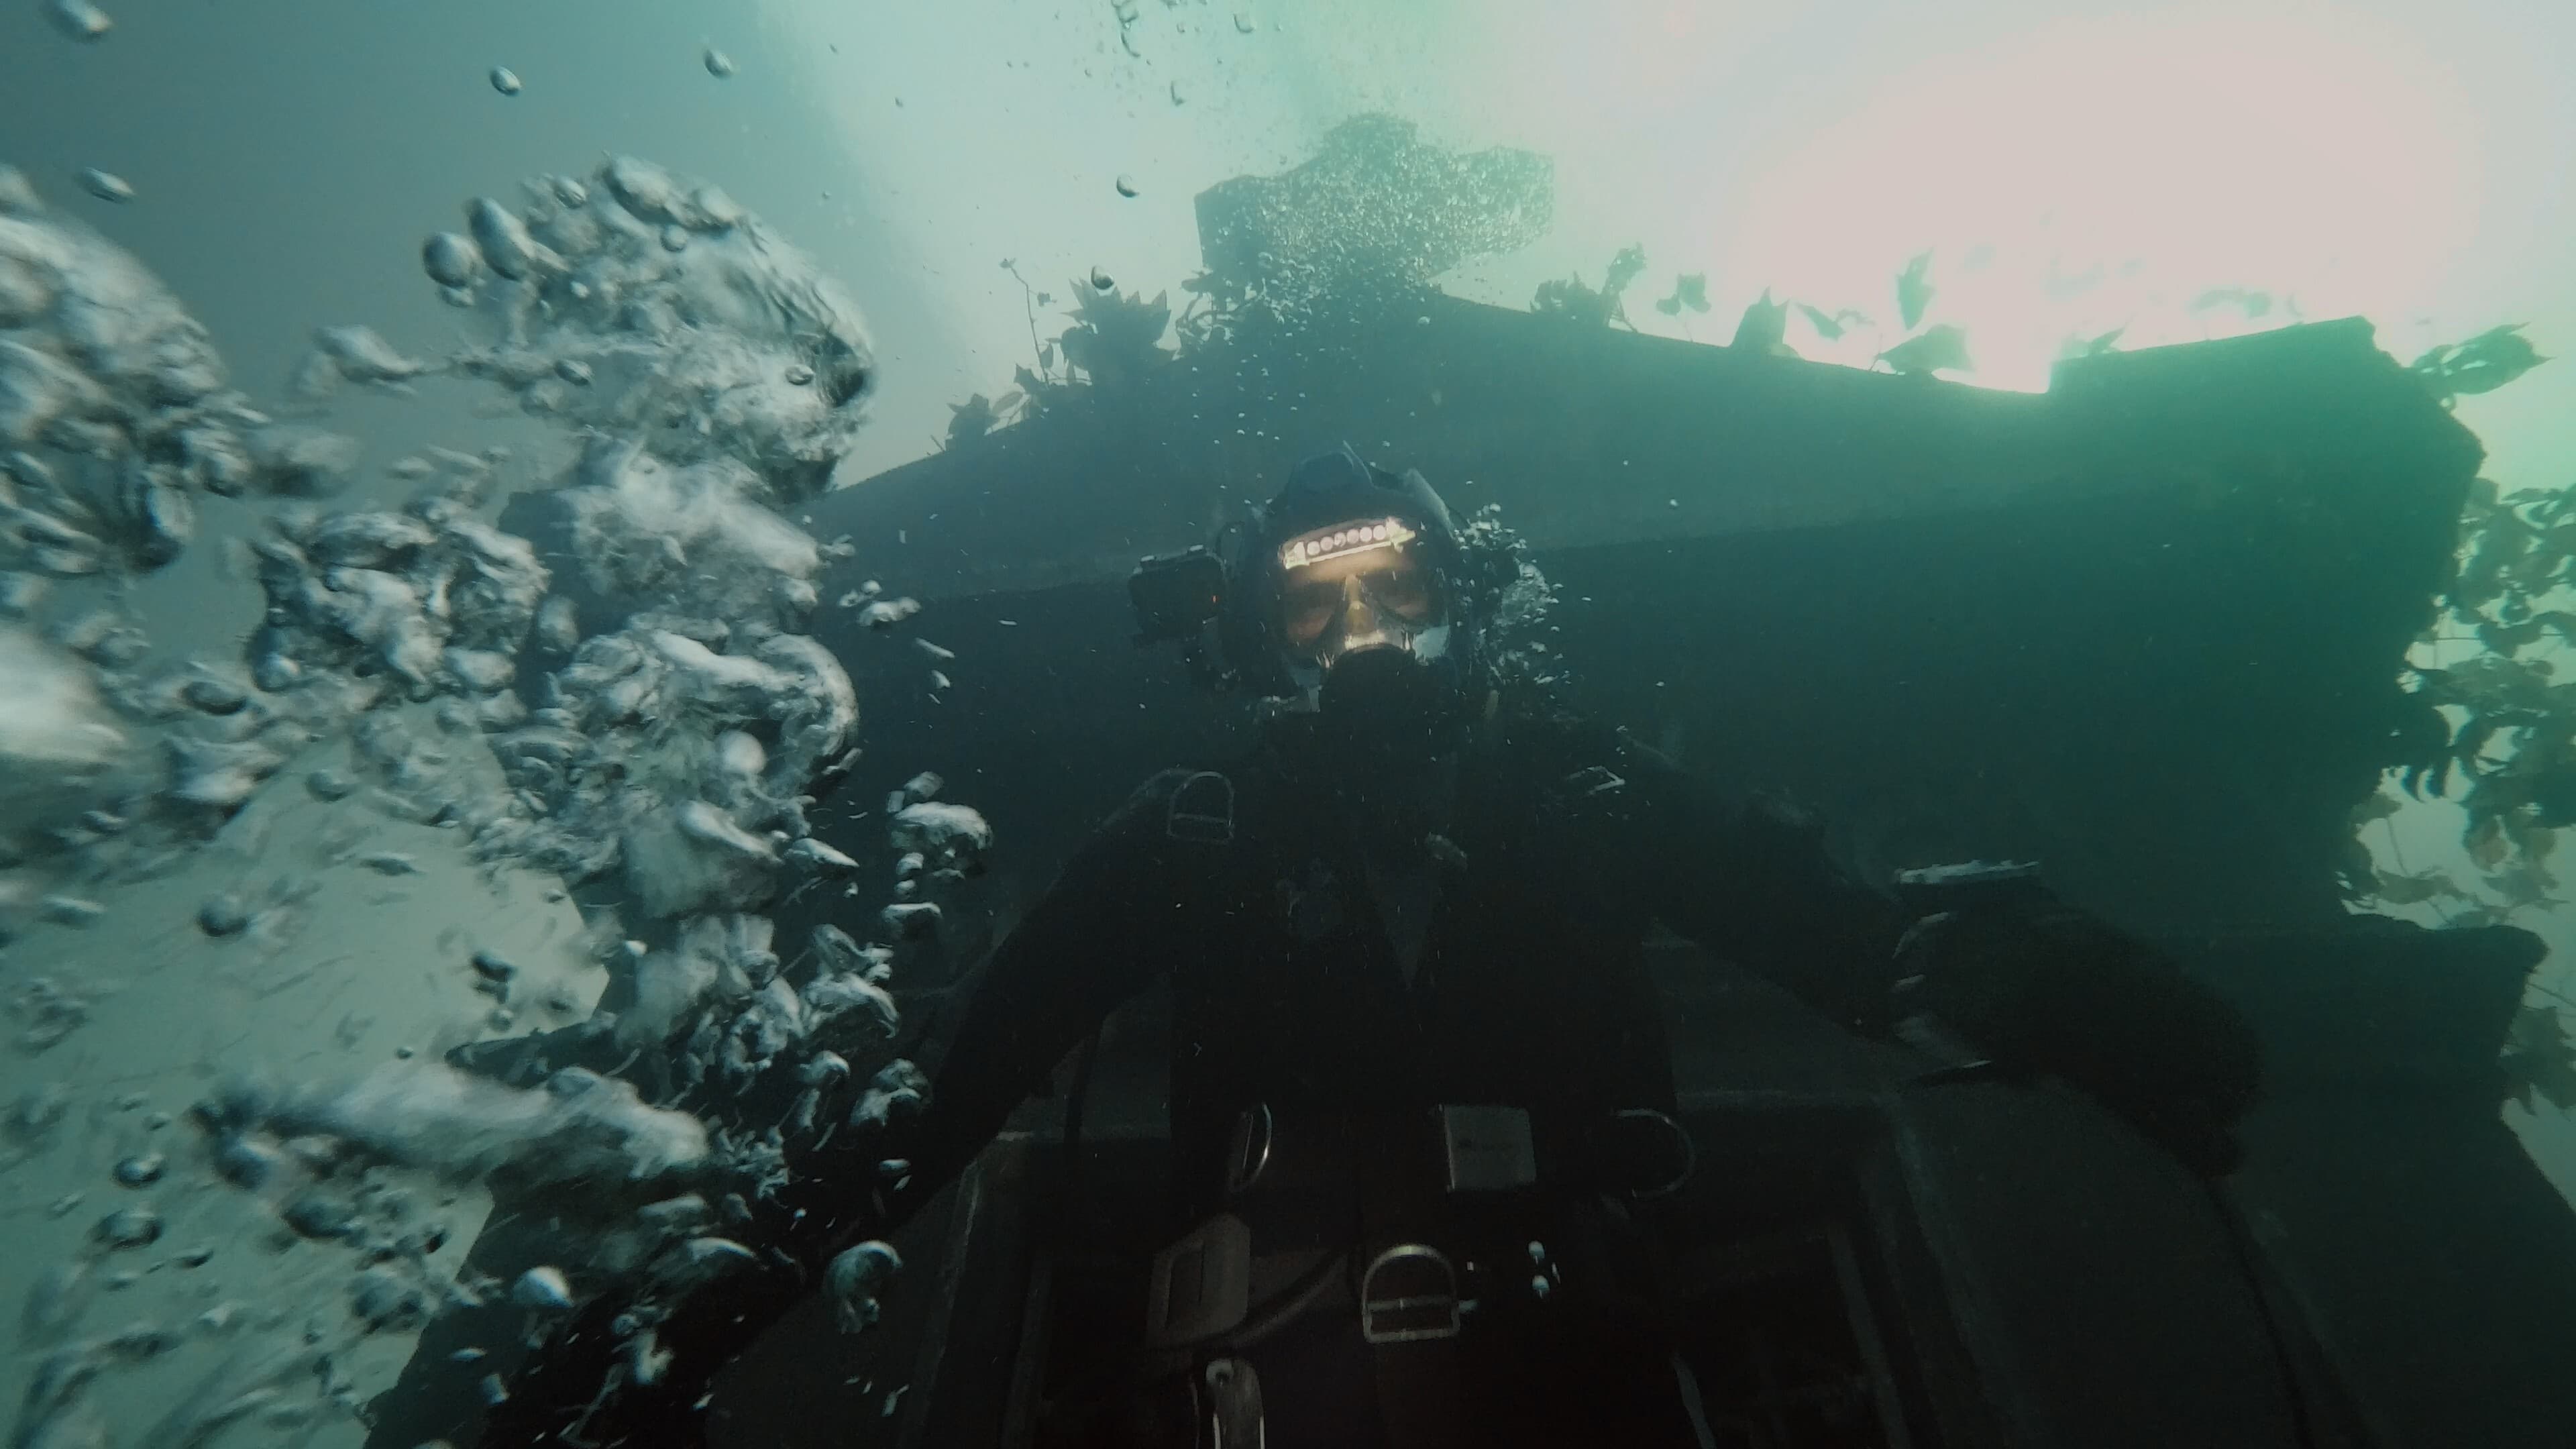 Screenshot from the film The Deep House. A scuba diver looks down with a looming house behind him under water.